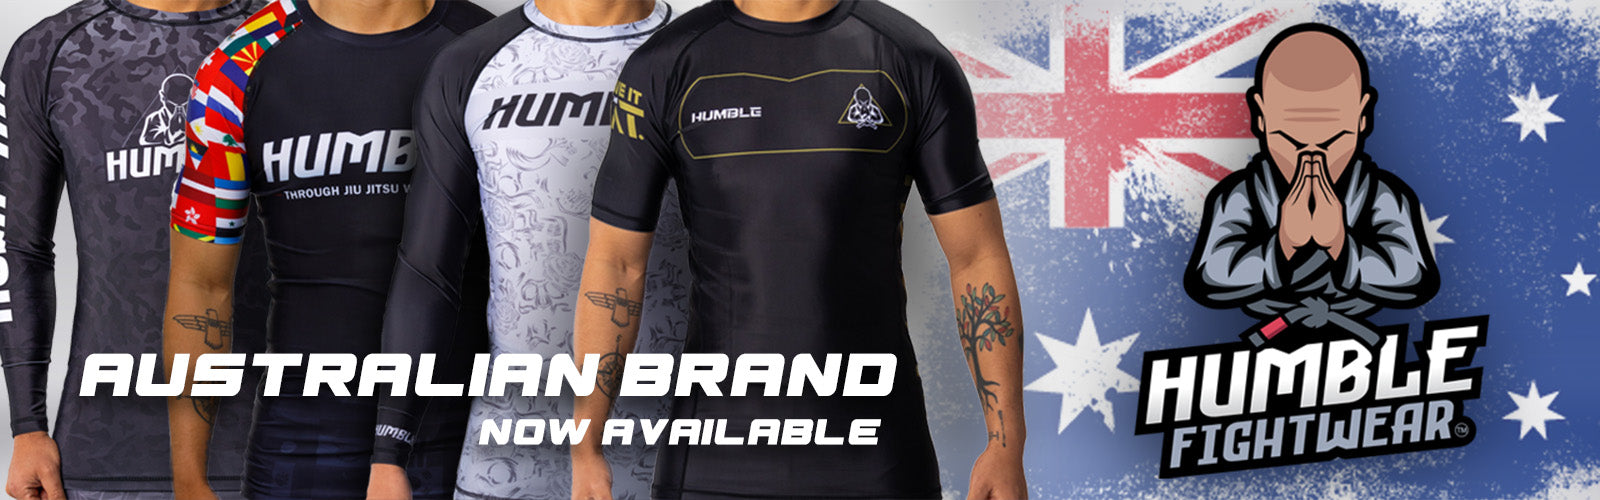 Humble fight gear is at Ringsport, Your premium Australian Bjj brand